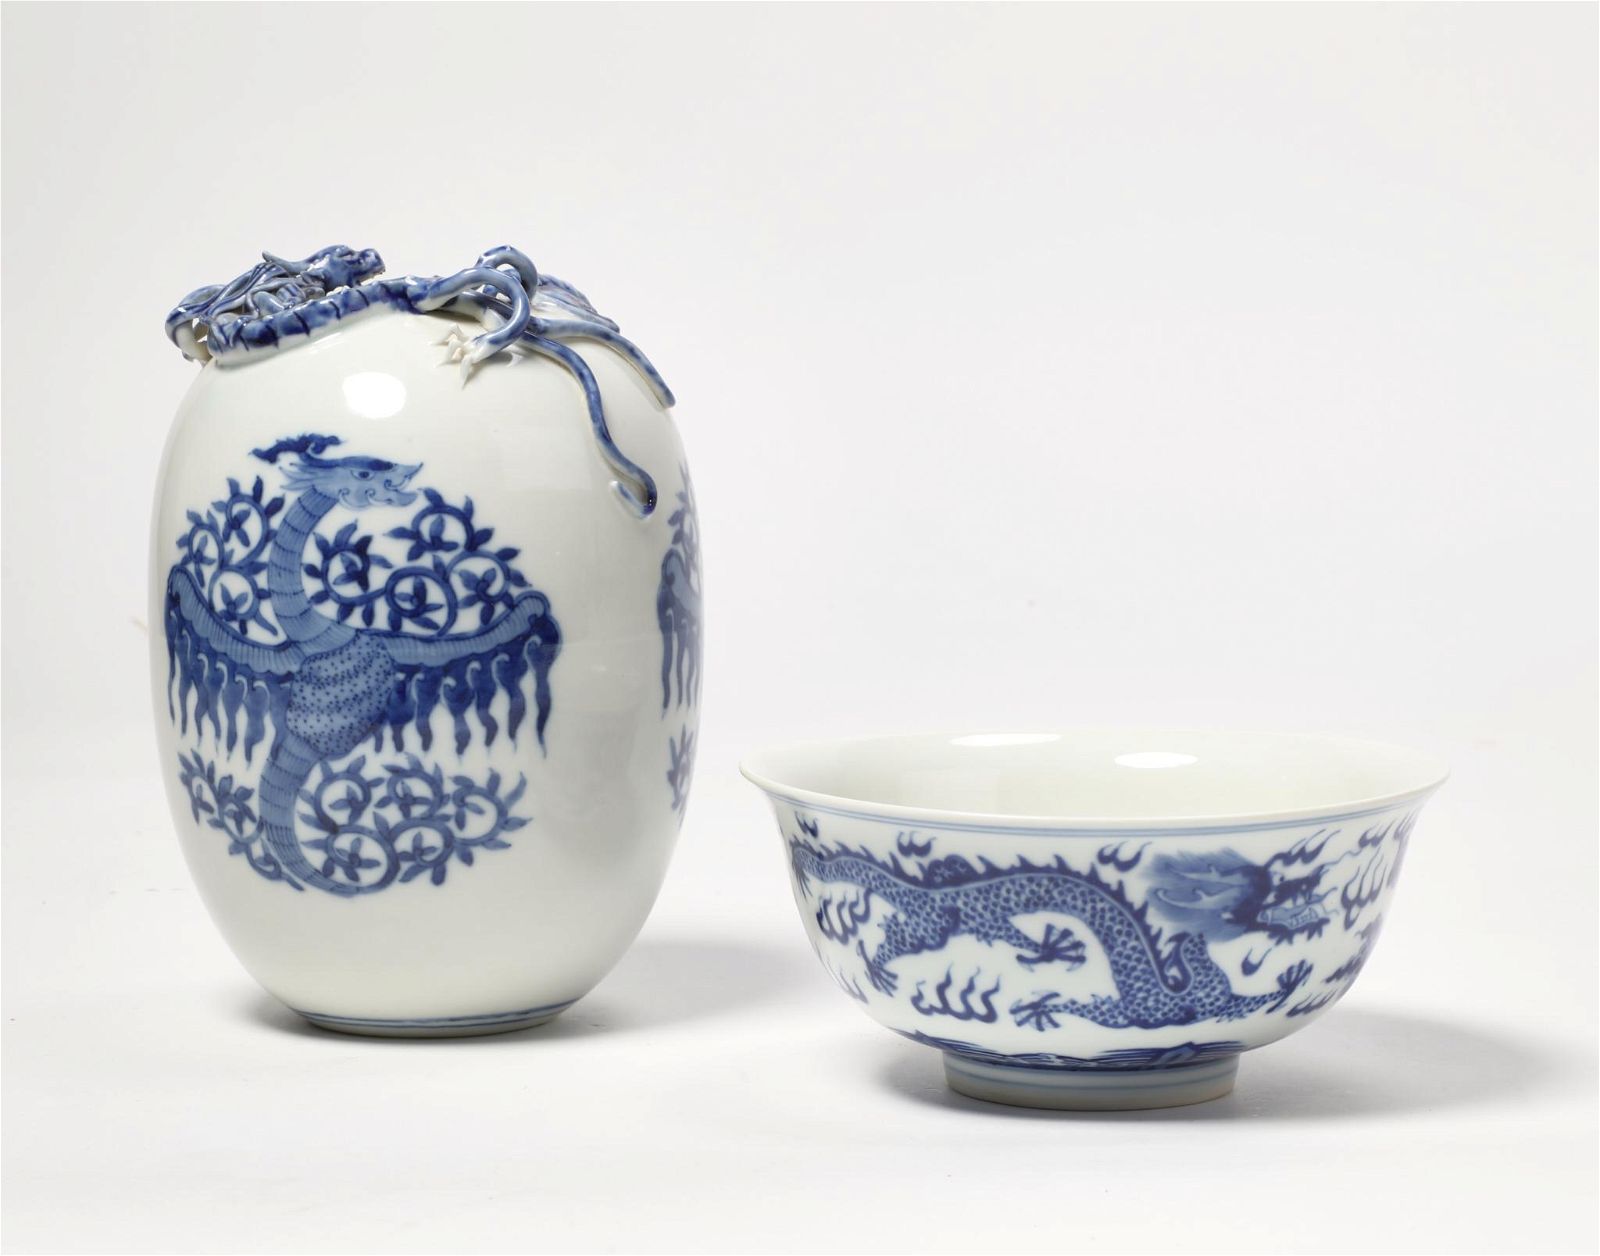 TWO CHINESE PORCELAIN DRAGON TABLETOP